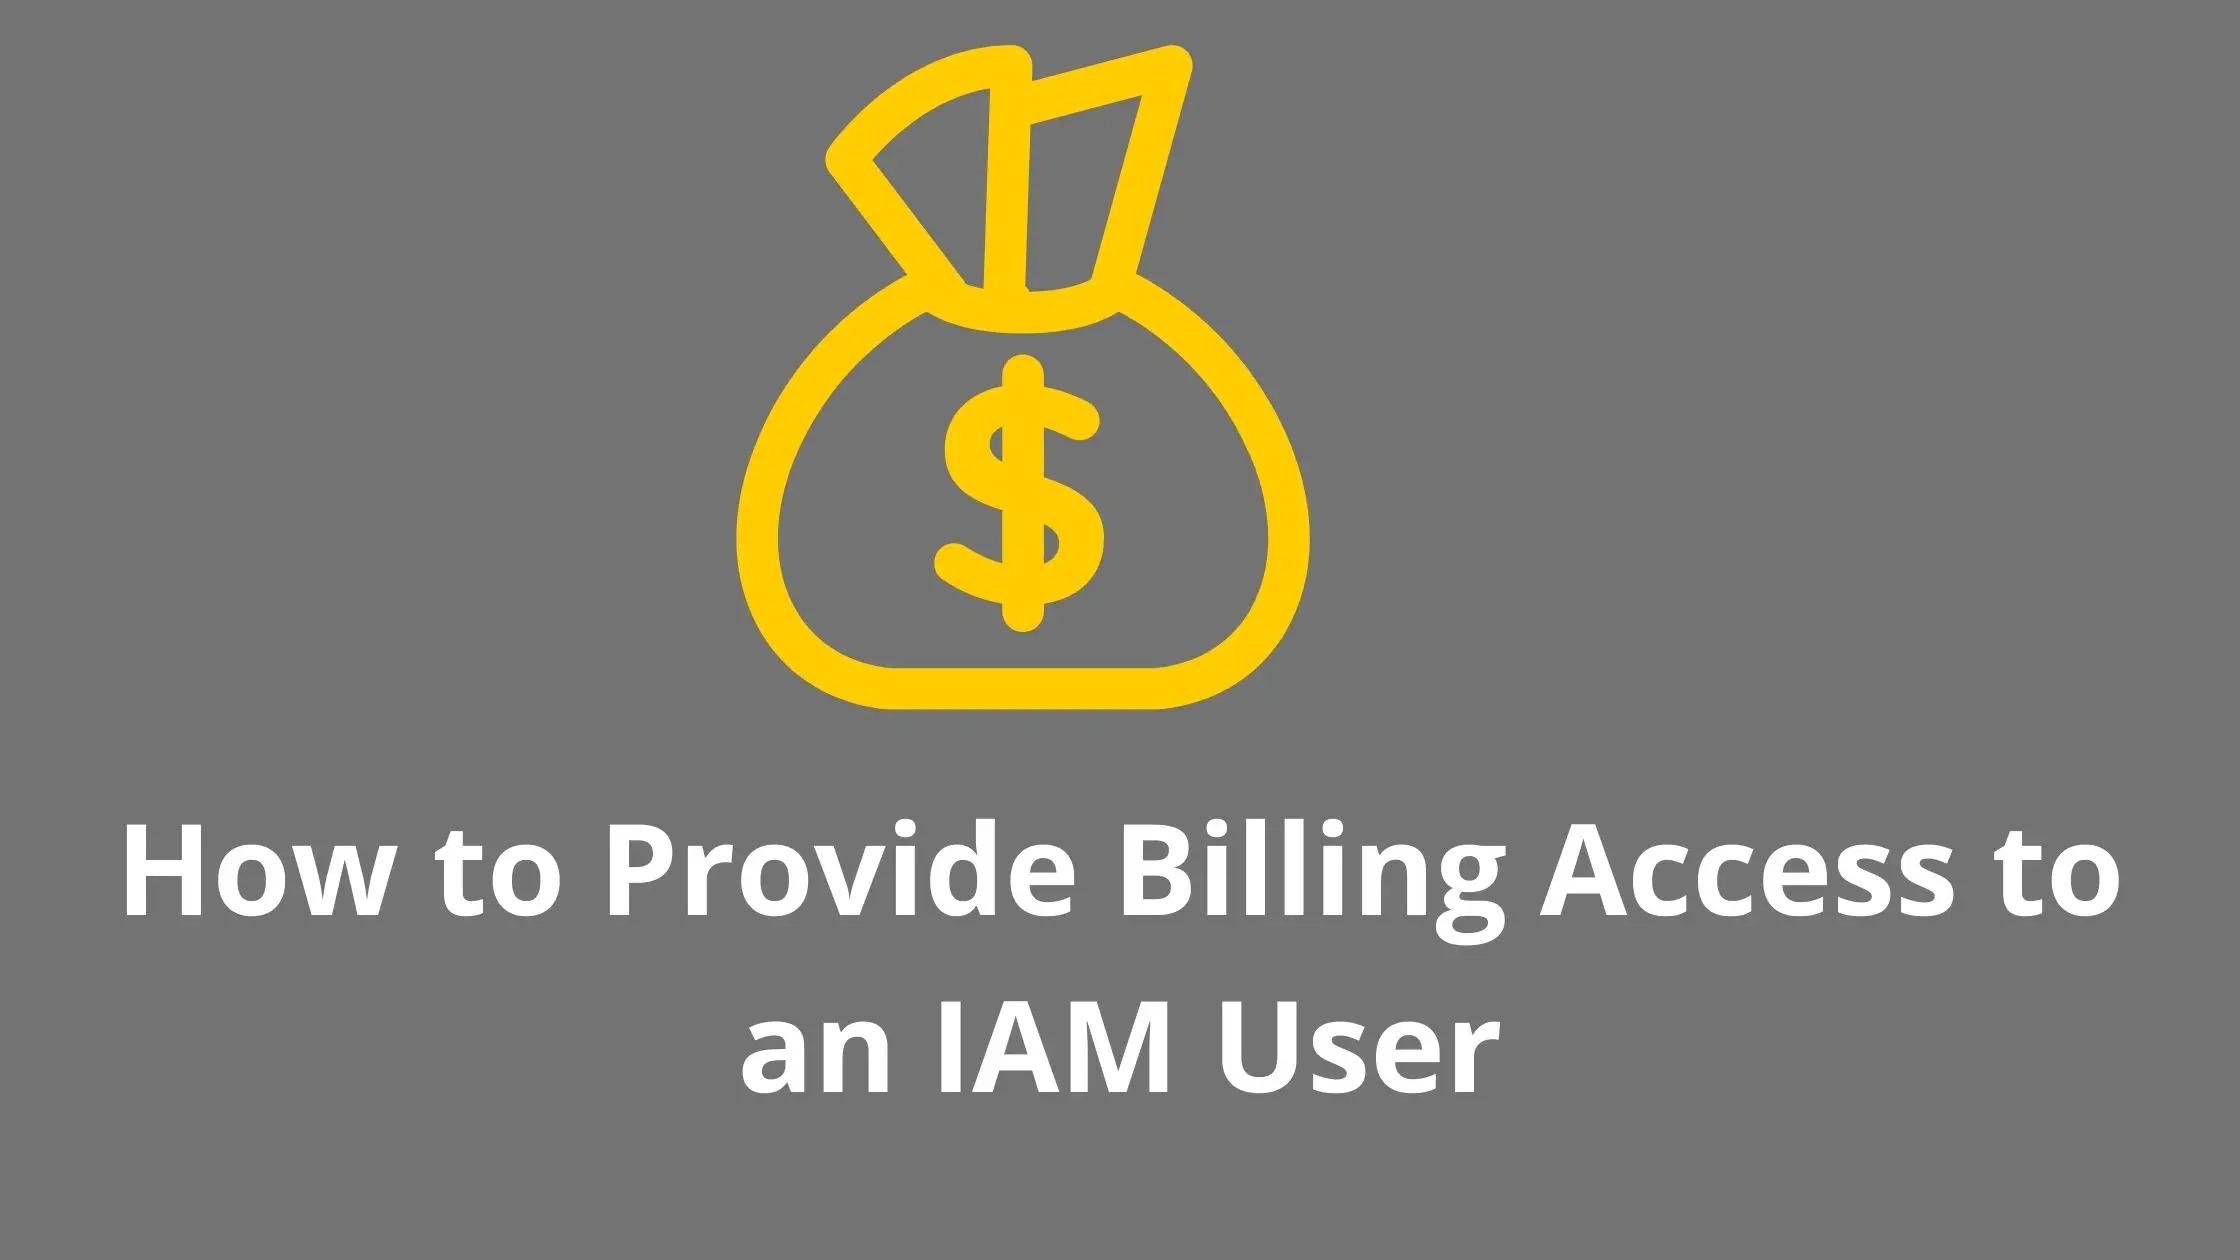 How to Provide Billing Access to an IAM User